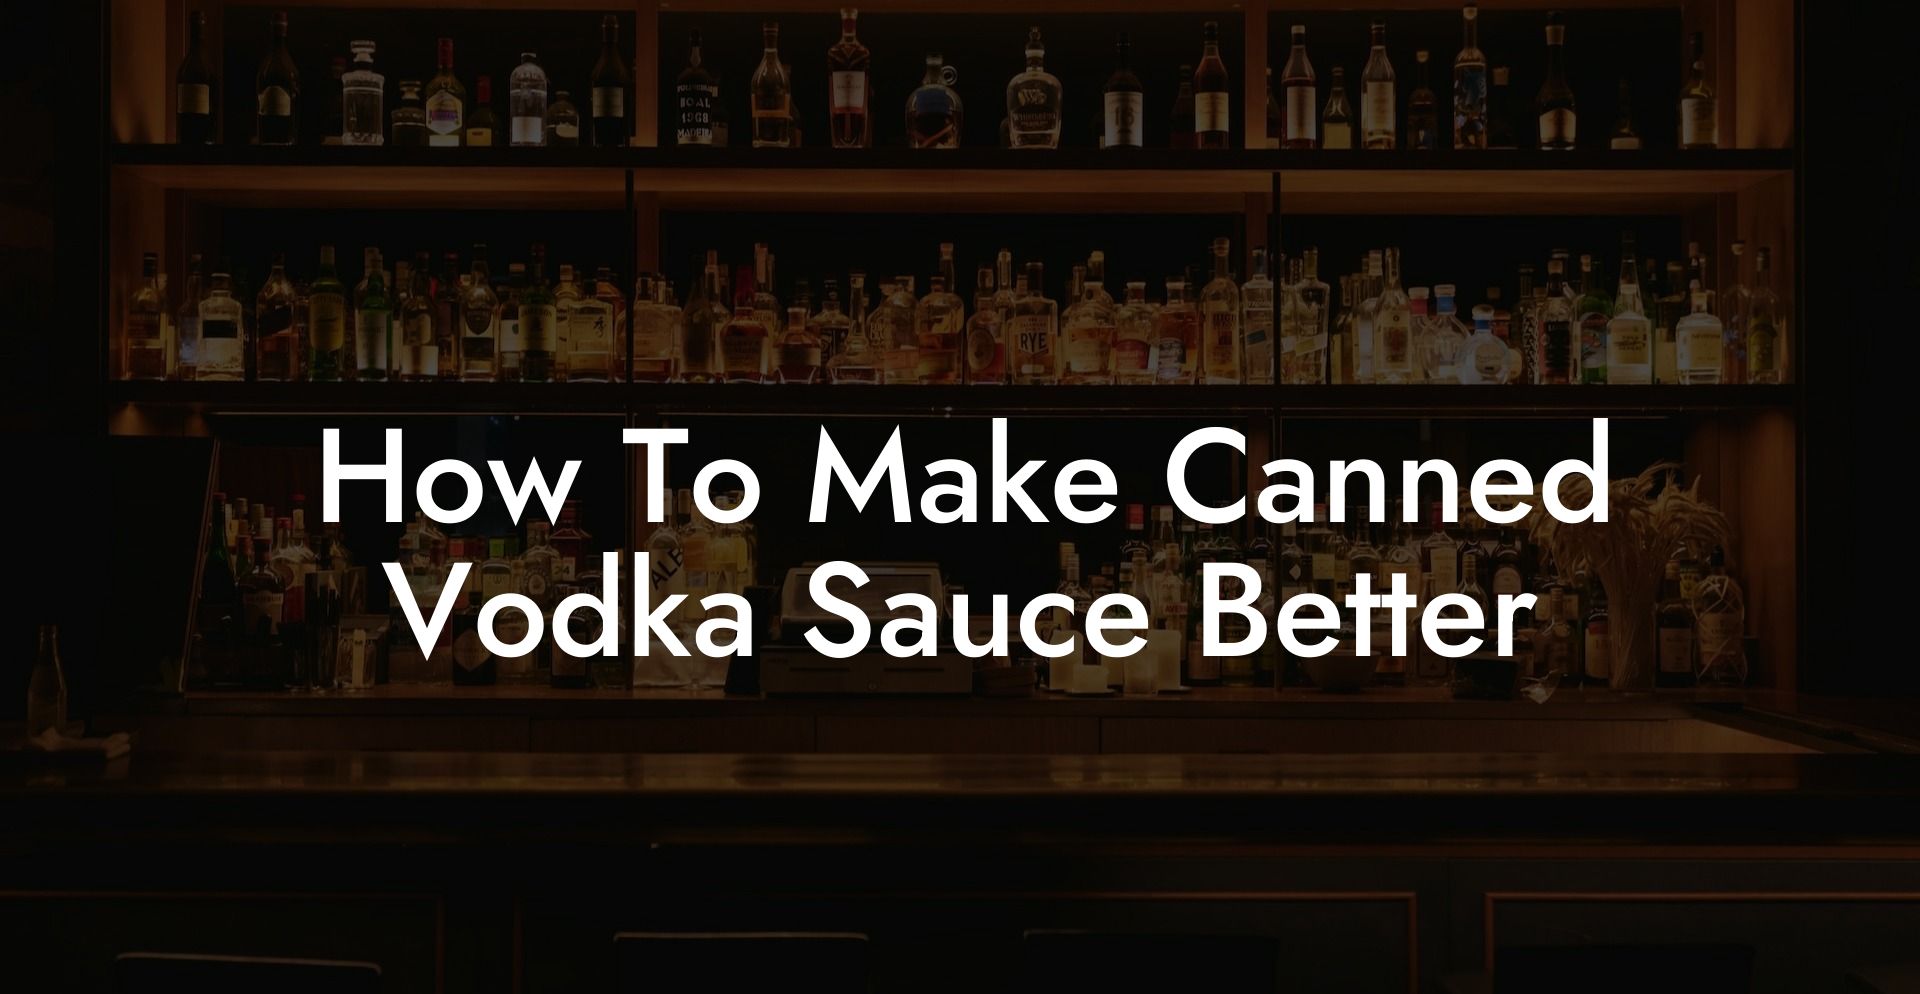 How To Make Canned Vodka Sauce Better